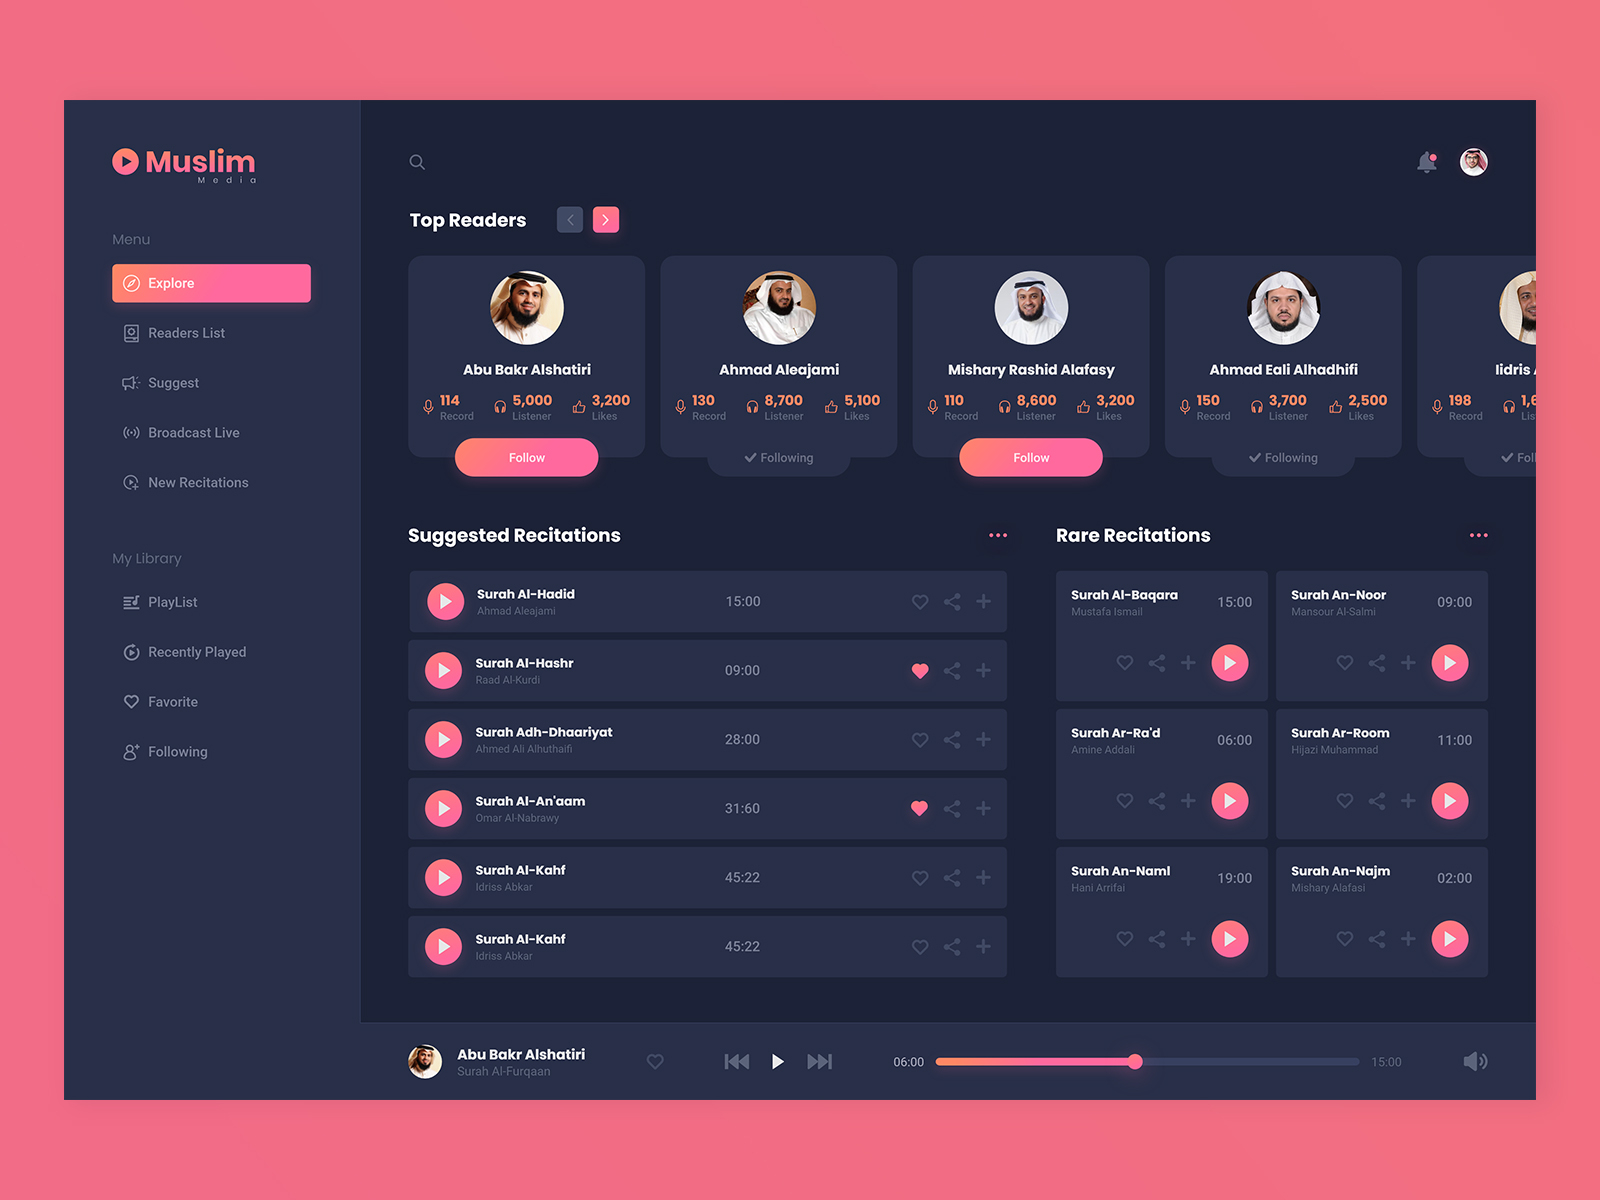 Dribbble - player-concept.png by ABL